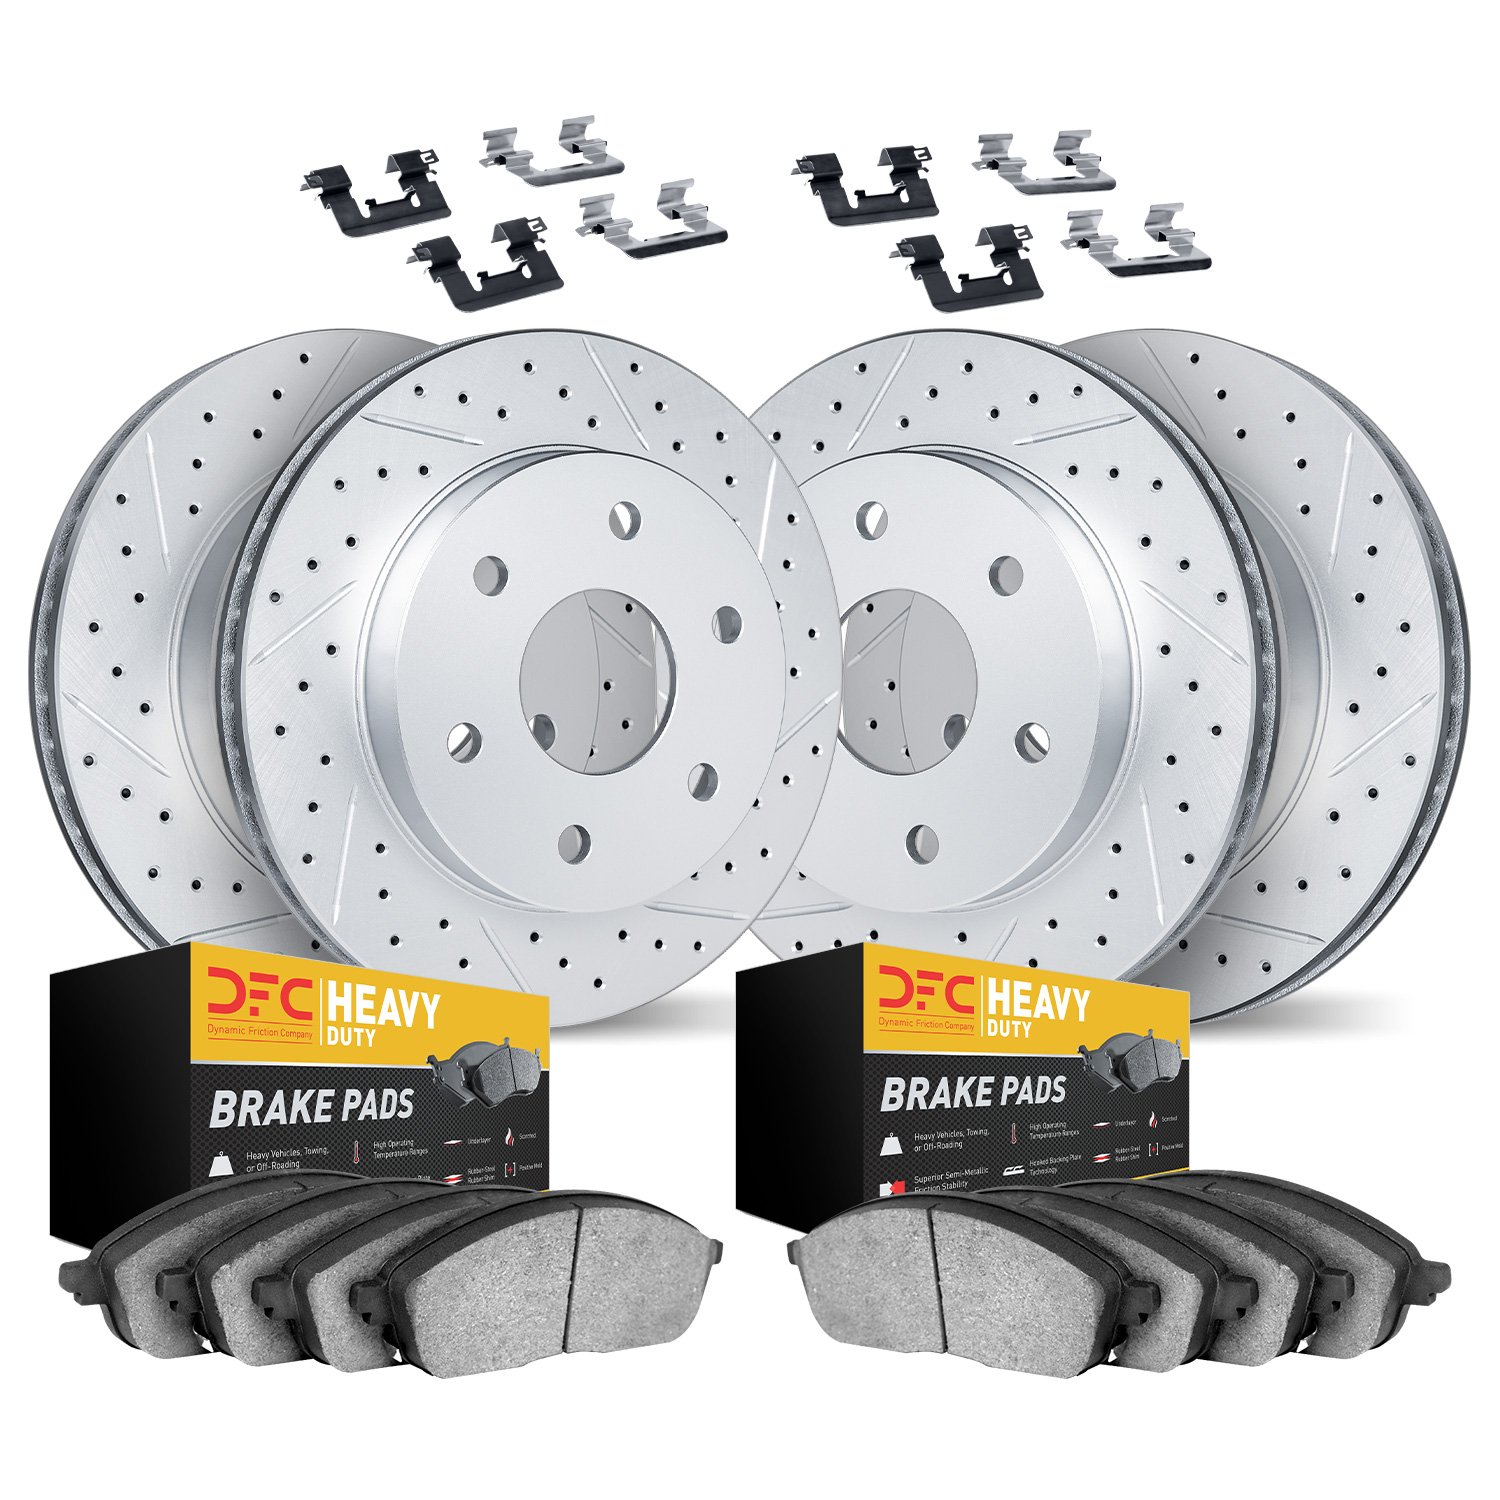 2214-40056 Geoperformance Drilled/Slotted Rotors w/Heavy-Duty Pads Kit & Hardware, Fits Select Multiple Makes/Models, Position: